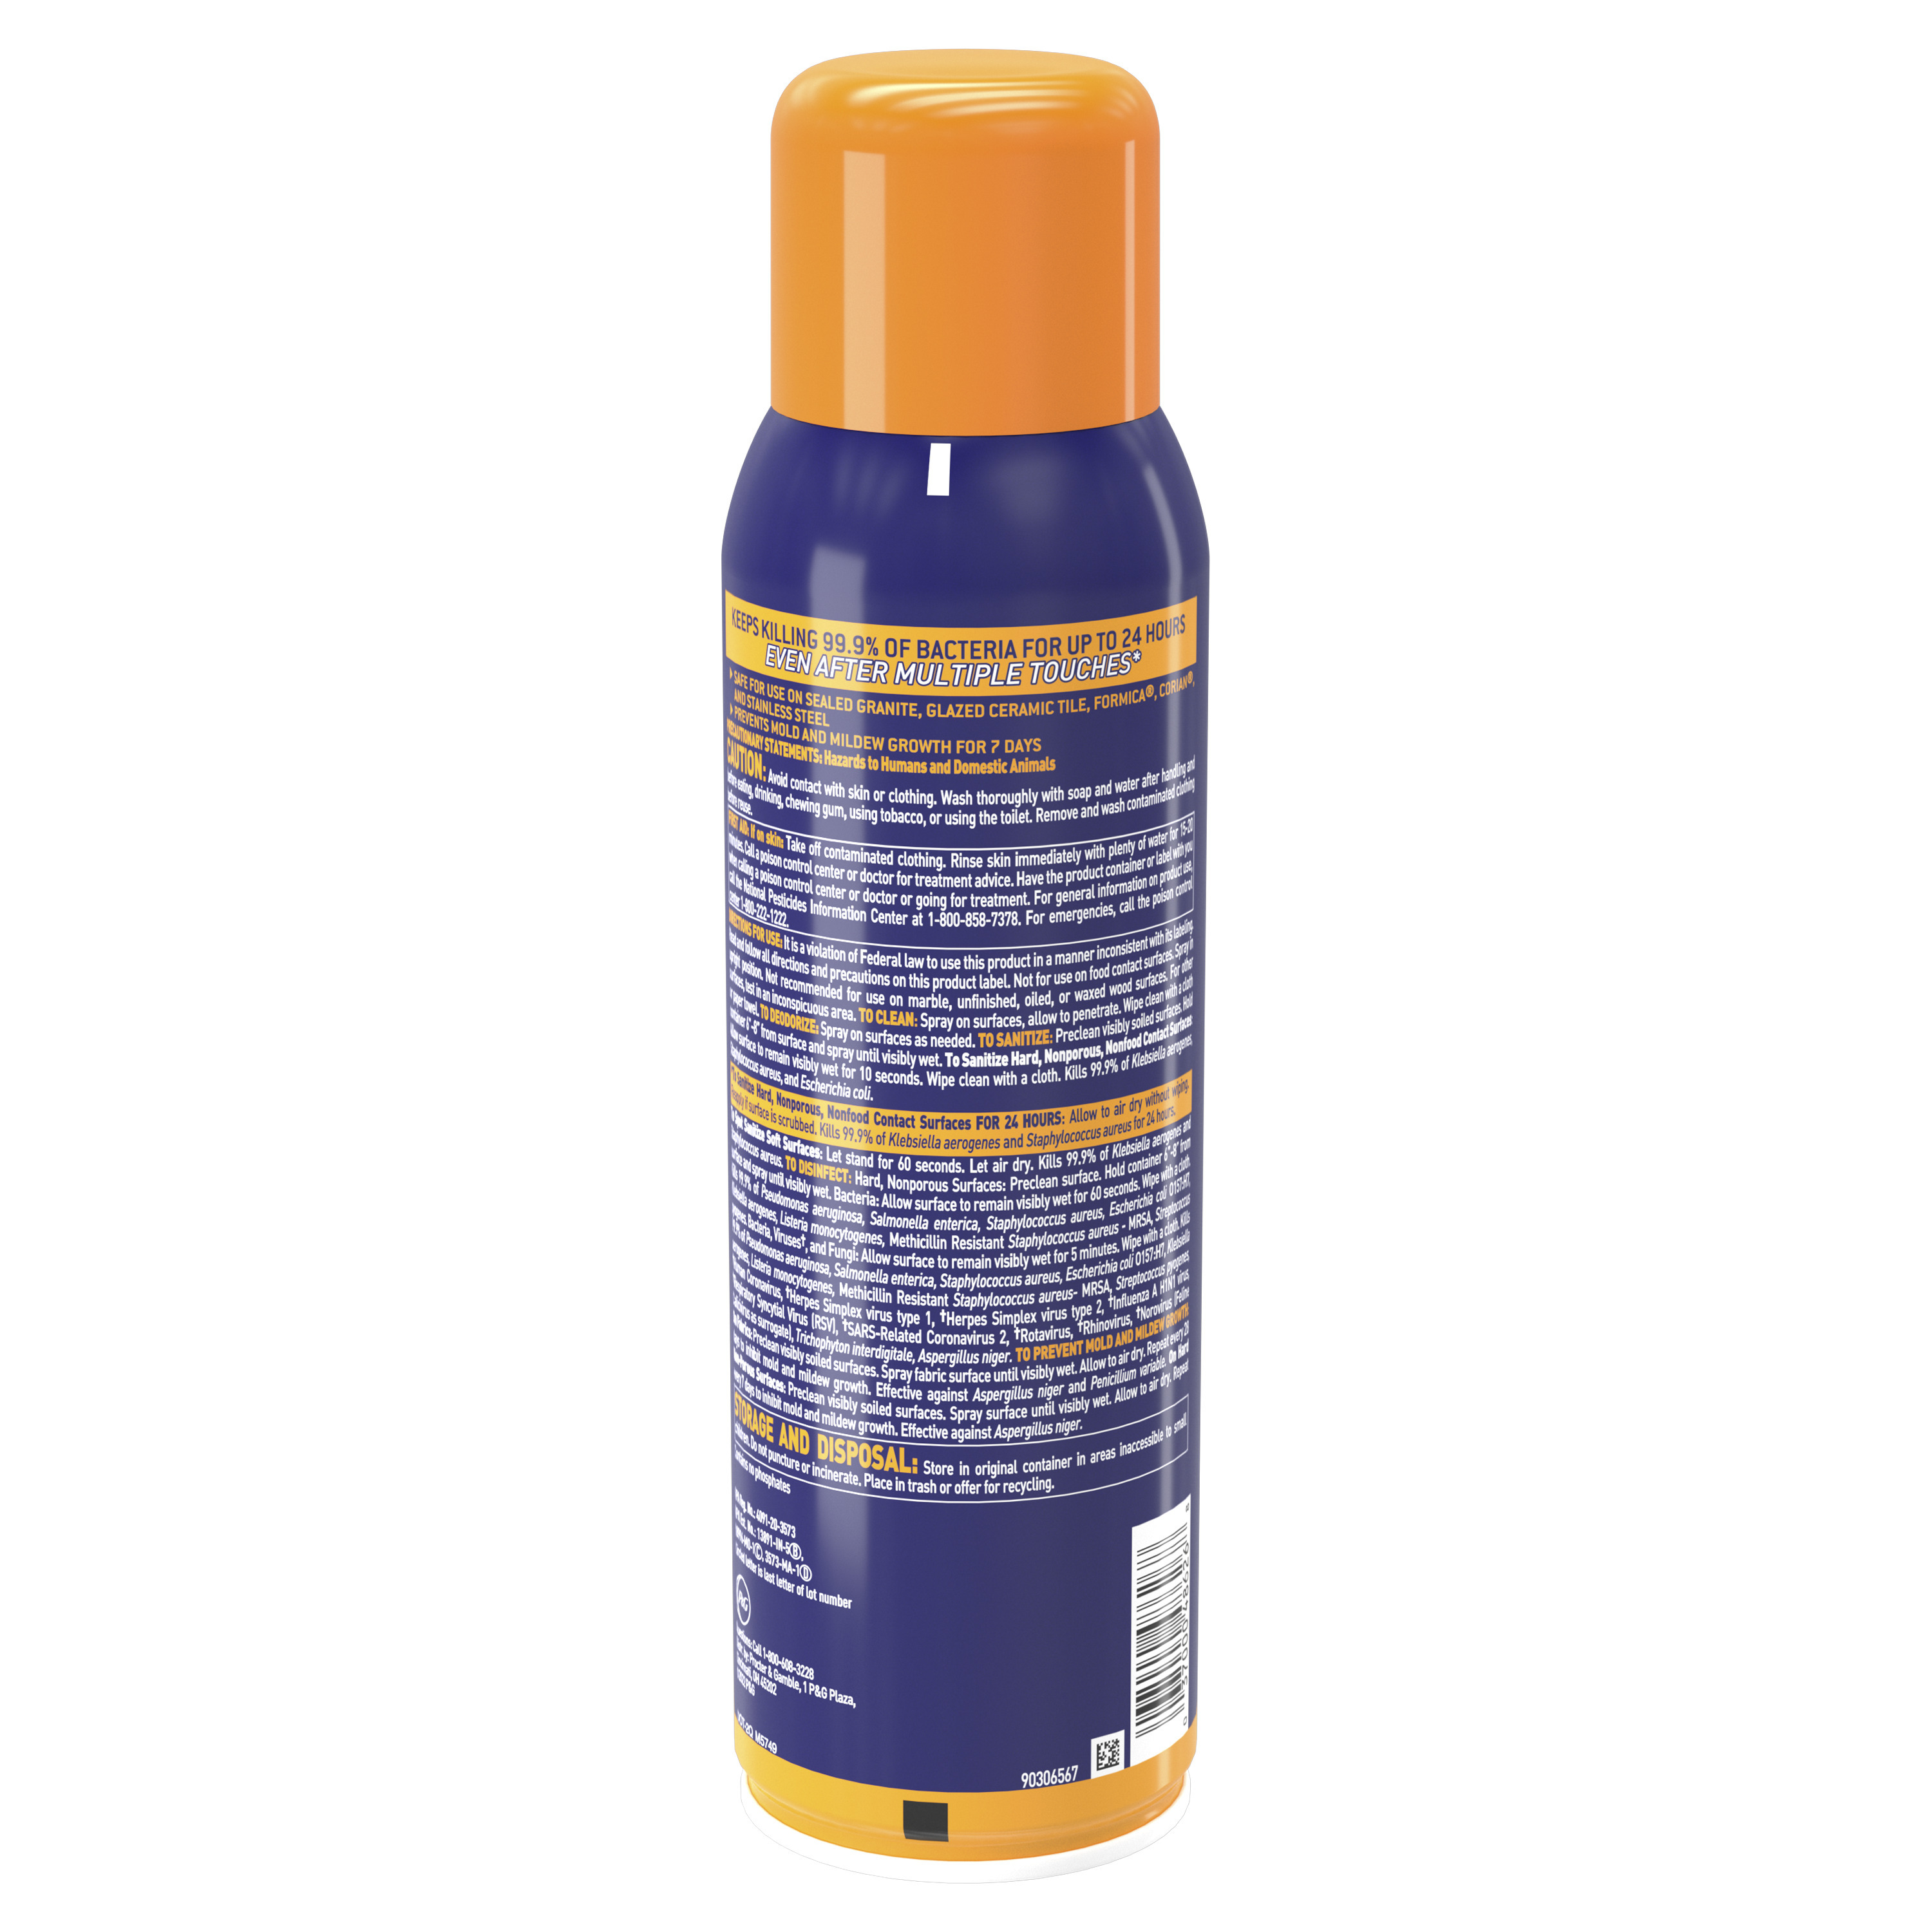 Microban 24 Hour Disinfectant Sanitizing Spray, Citrus Scent, 15 oz - image 4 of 18